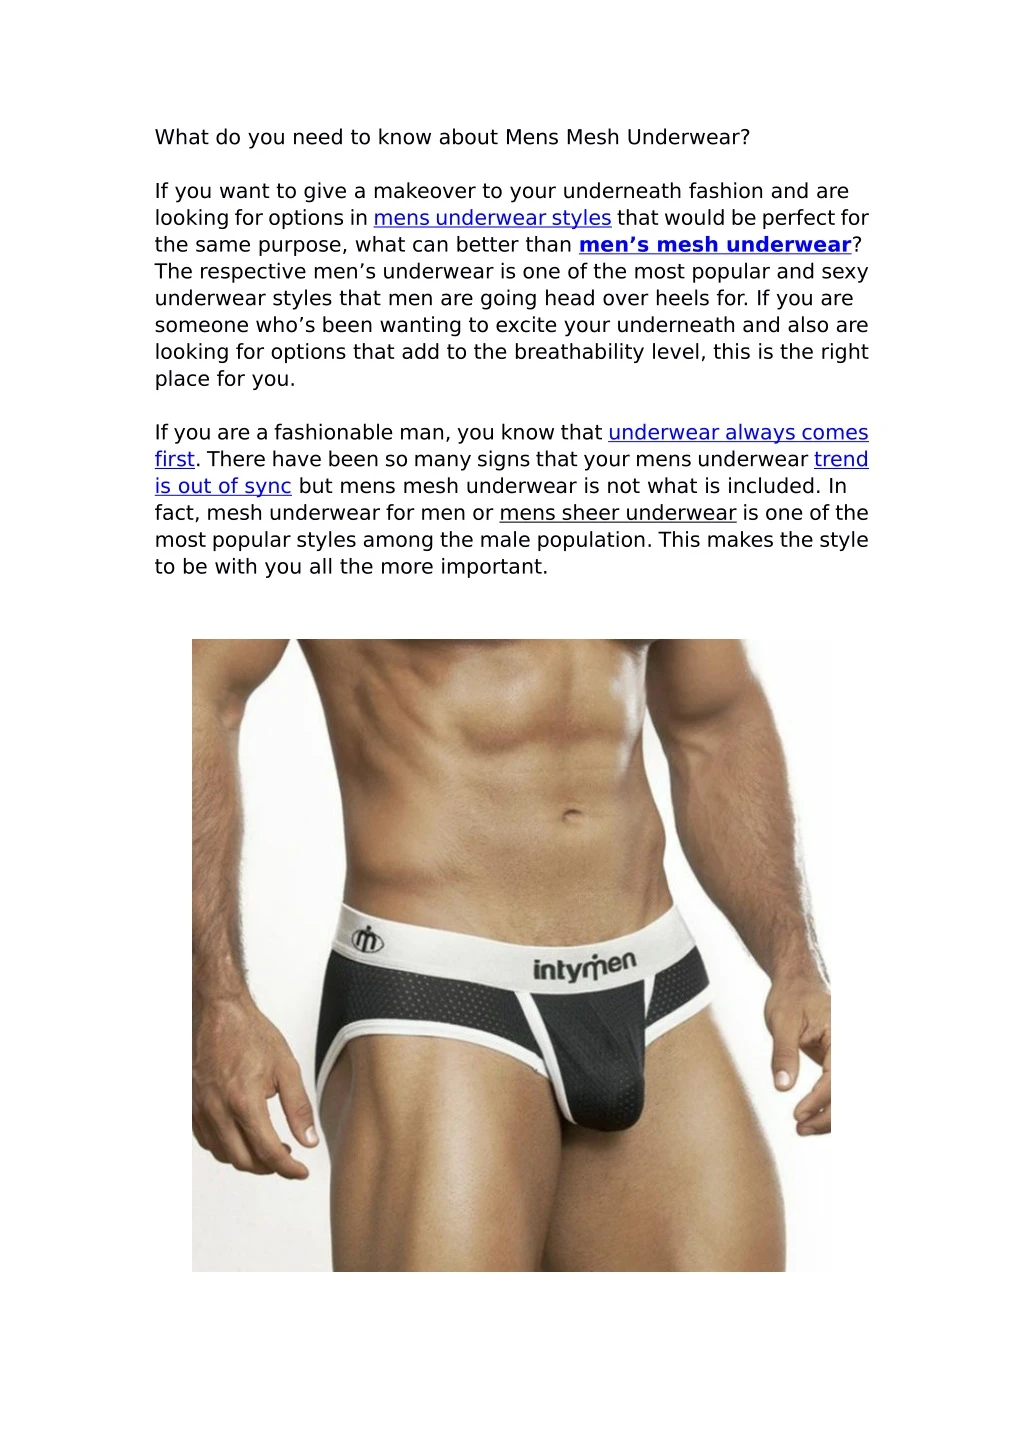 what do you need to know about mens mesh underwear